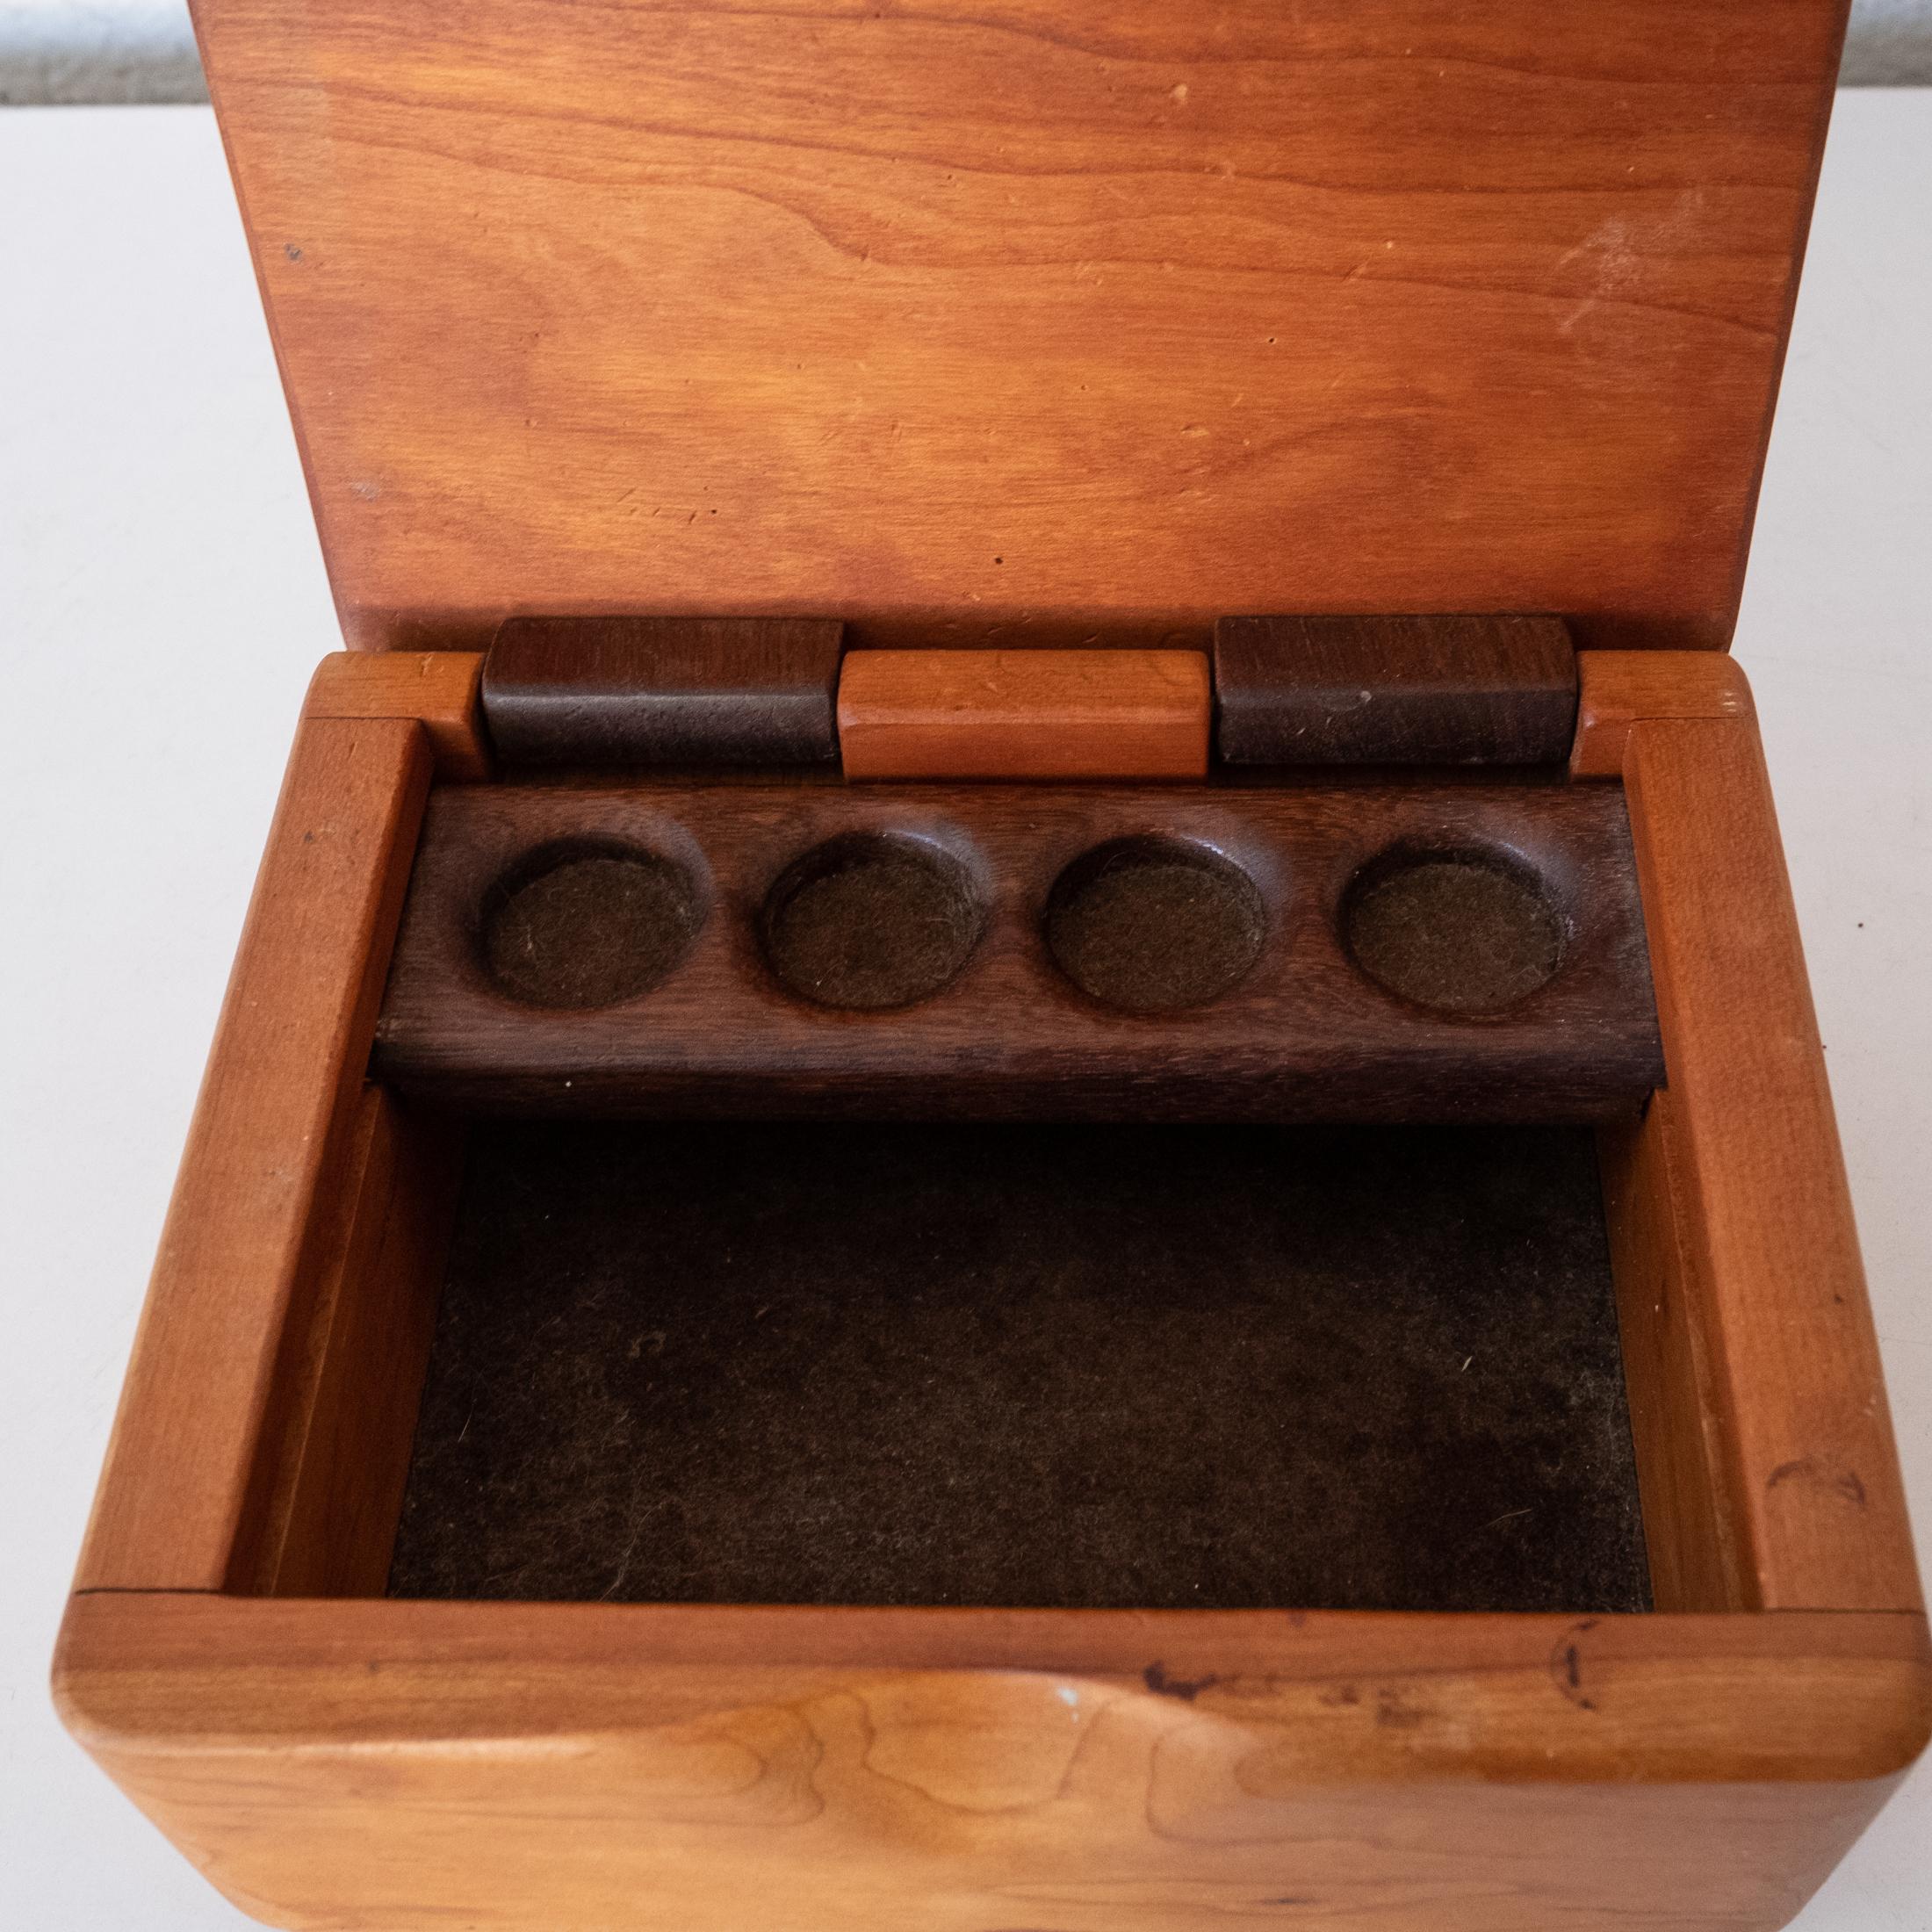 Studio Handcrafted Wood Jewelry Box 1970s In Good Condition For Sale In San Diego, CA